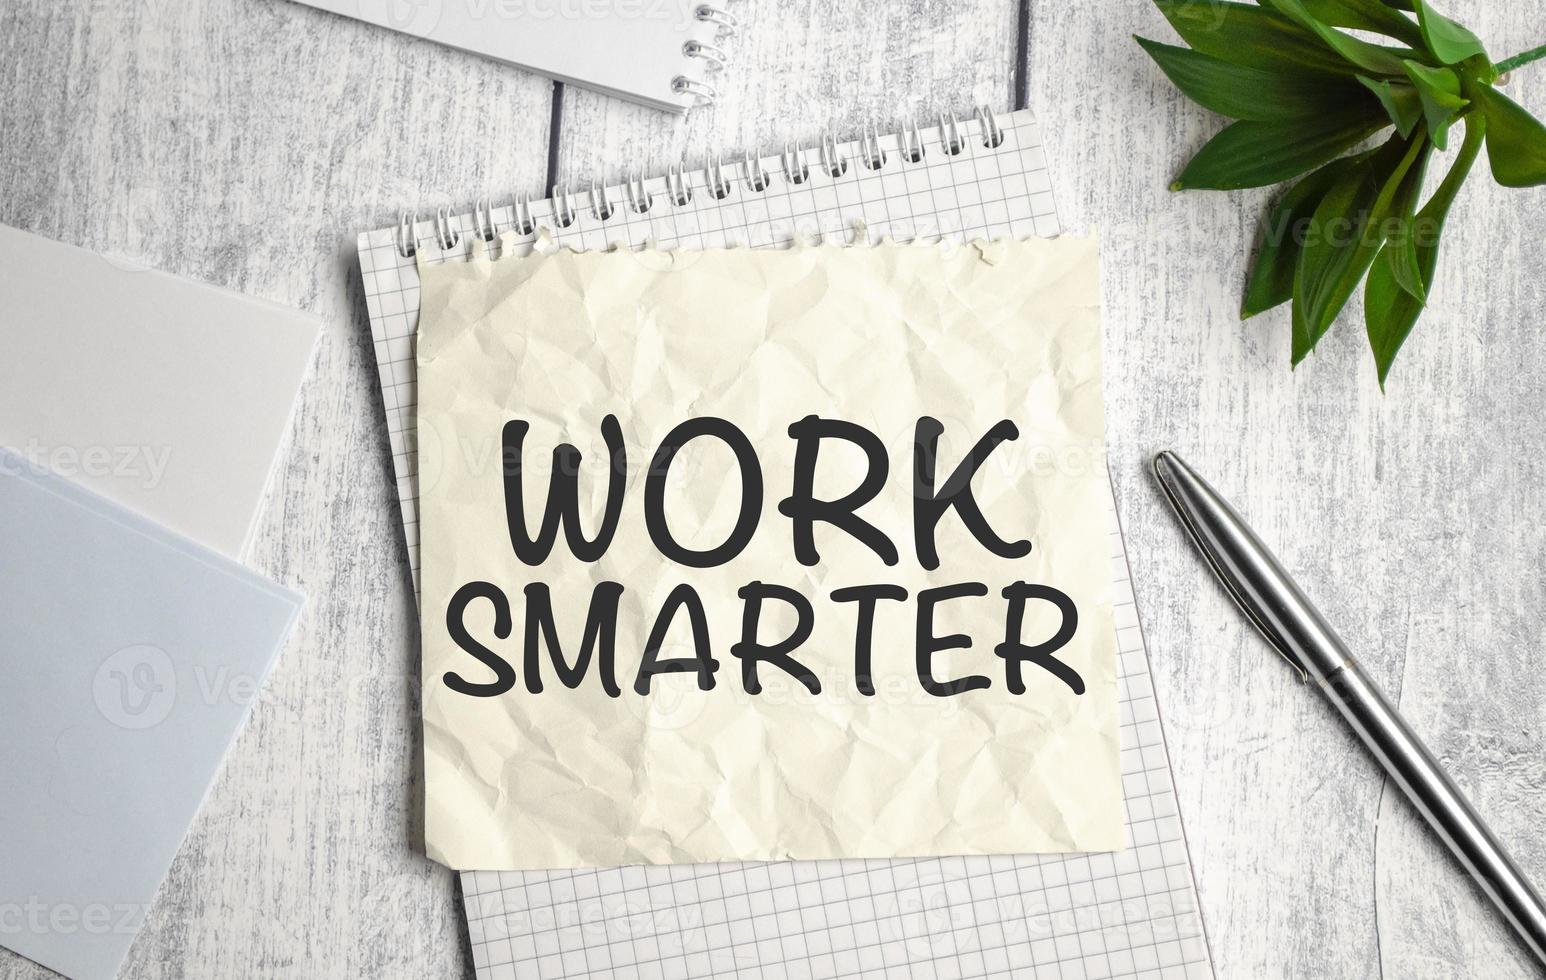 WORK SMARTER word on sticker on notepad with pen and calculator photo